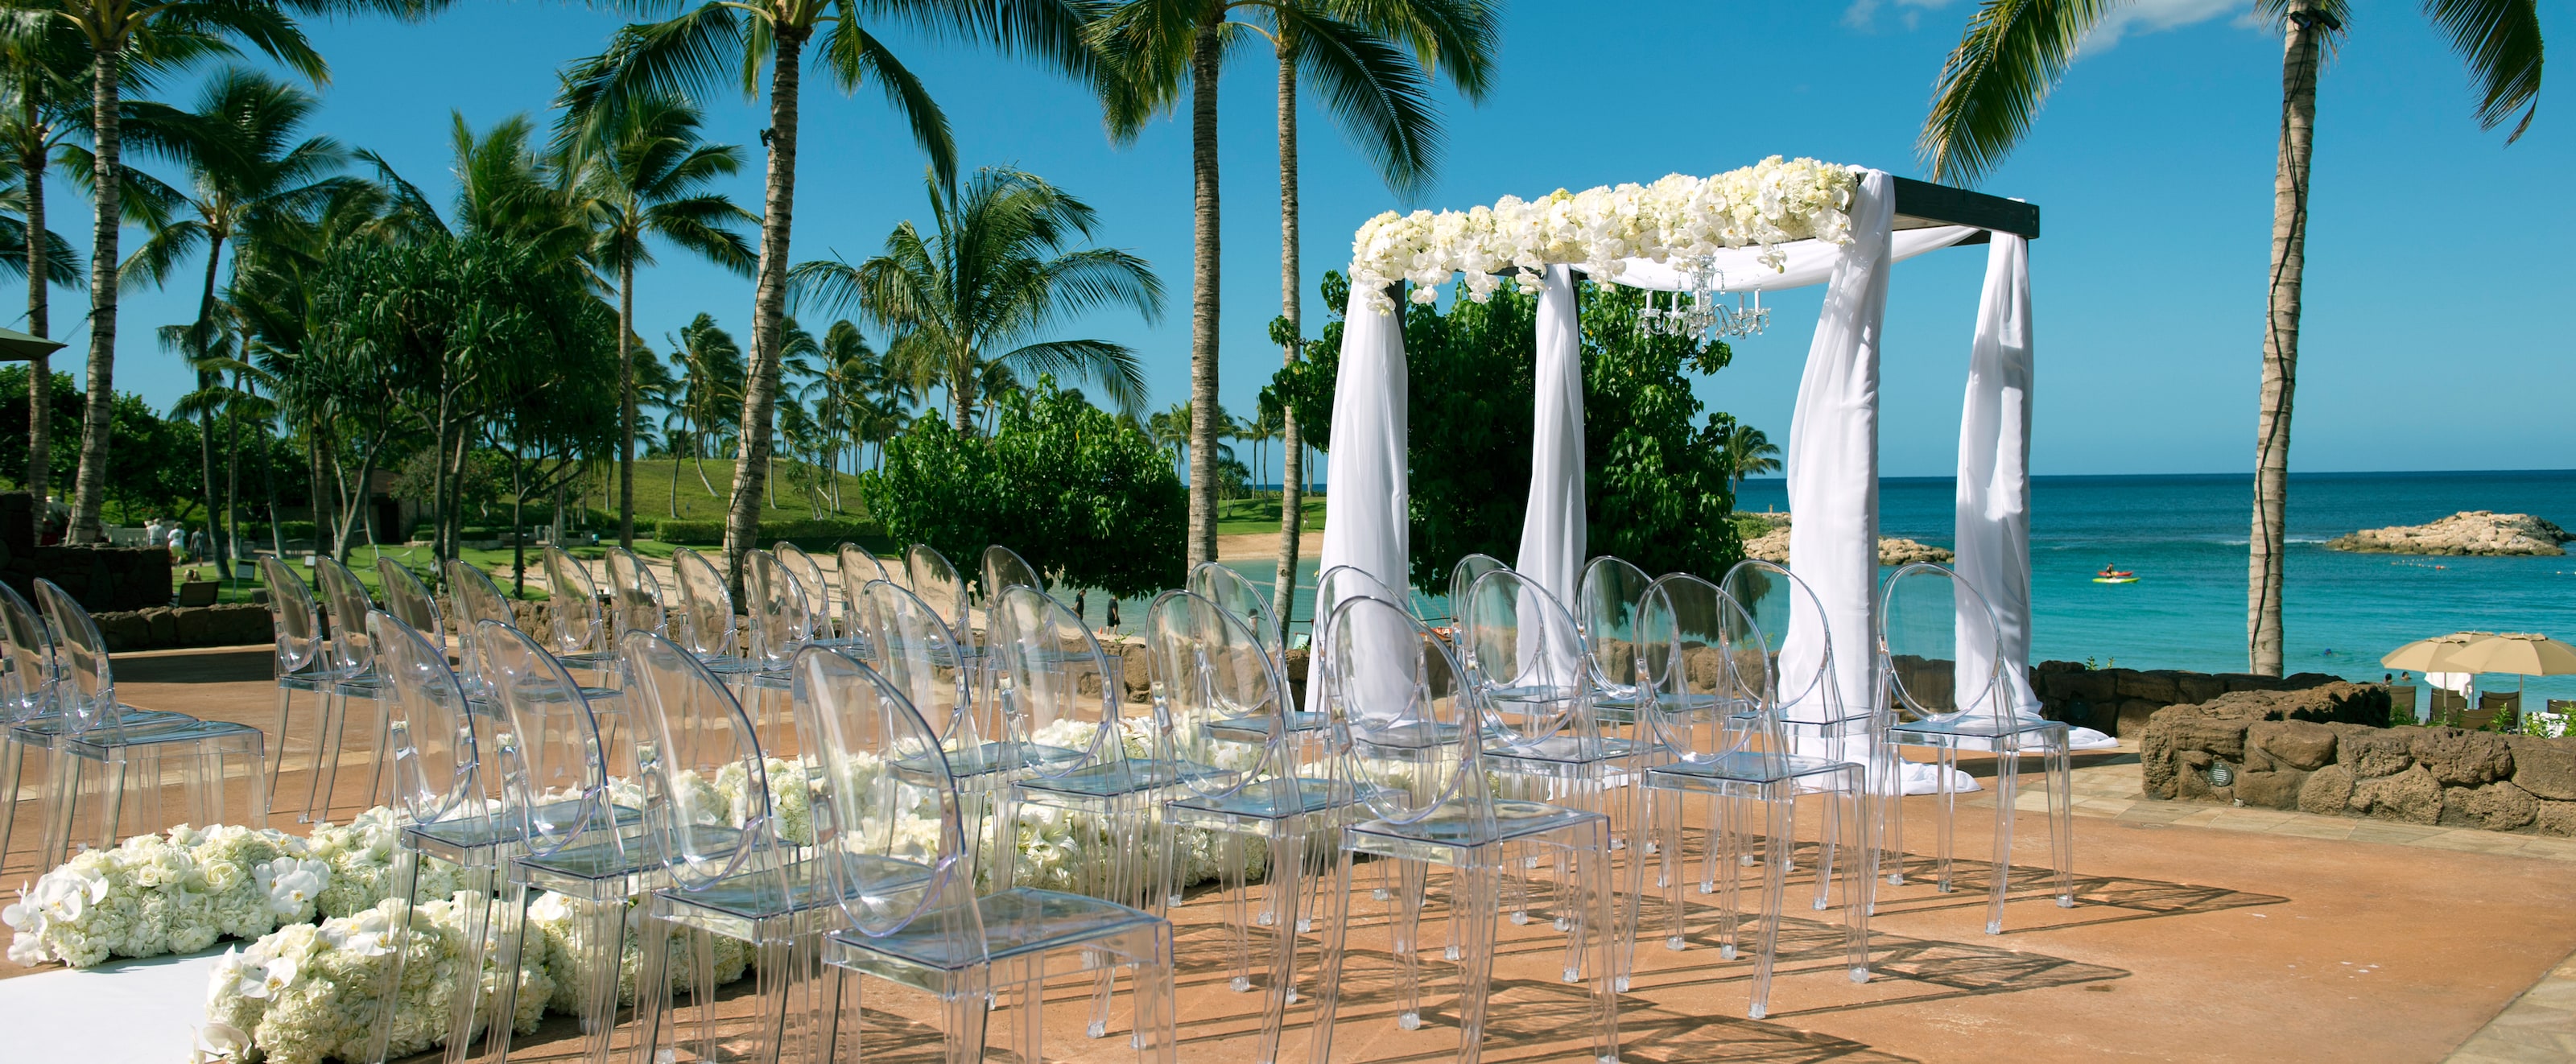 Rows of transparent chairs line an aisle leading to a seaside altar draped in white fabric and flowers